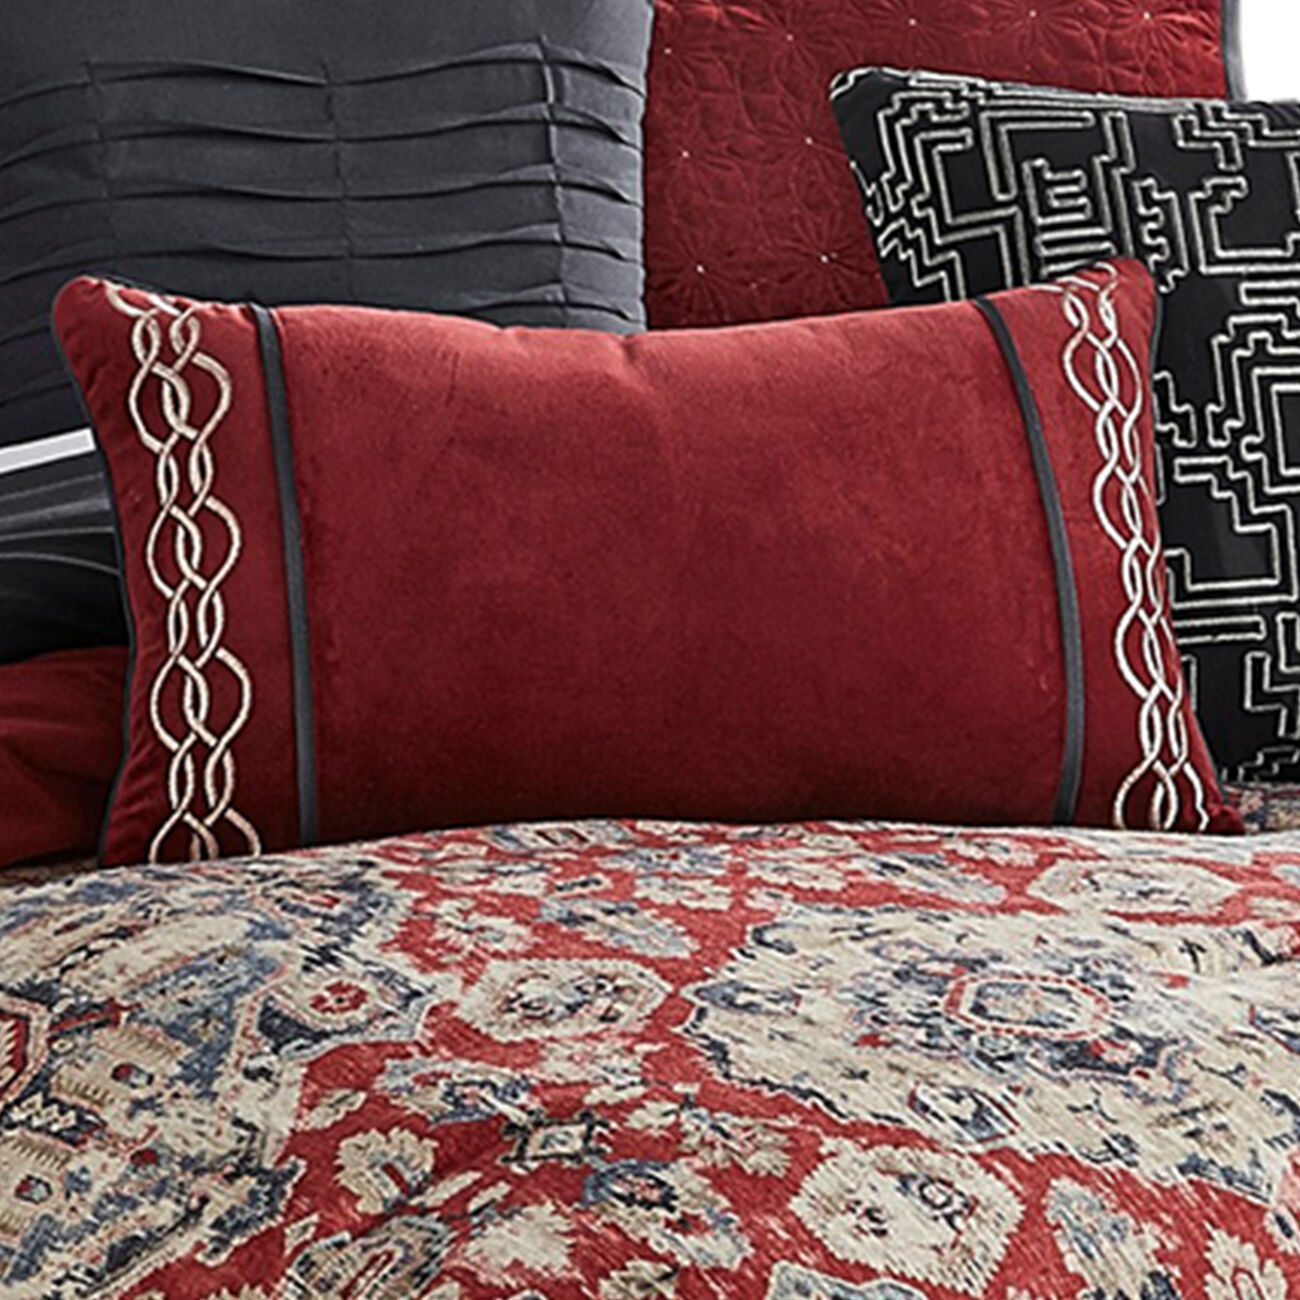 10 Piece King Size Comforter Set with Medallion Print, Red and Blue